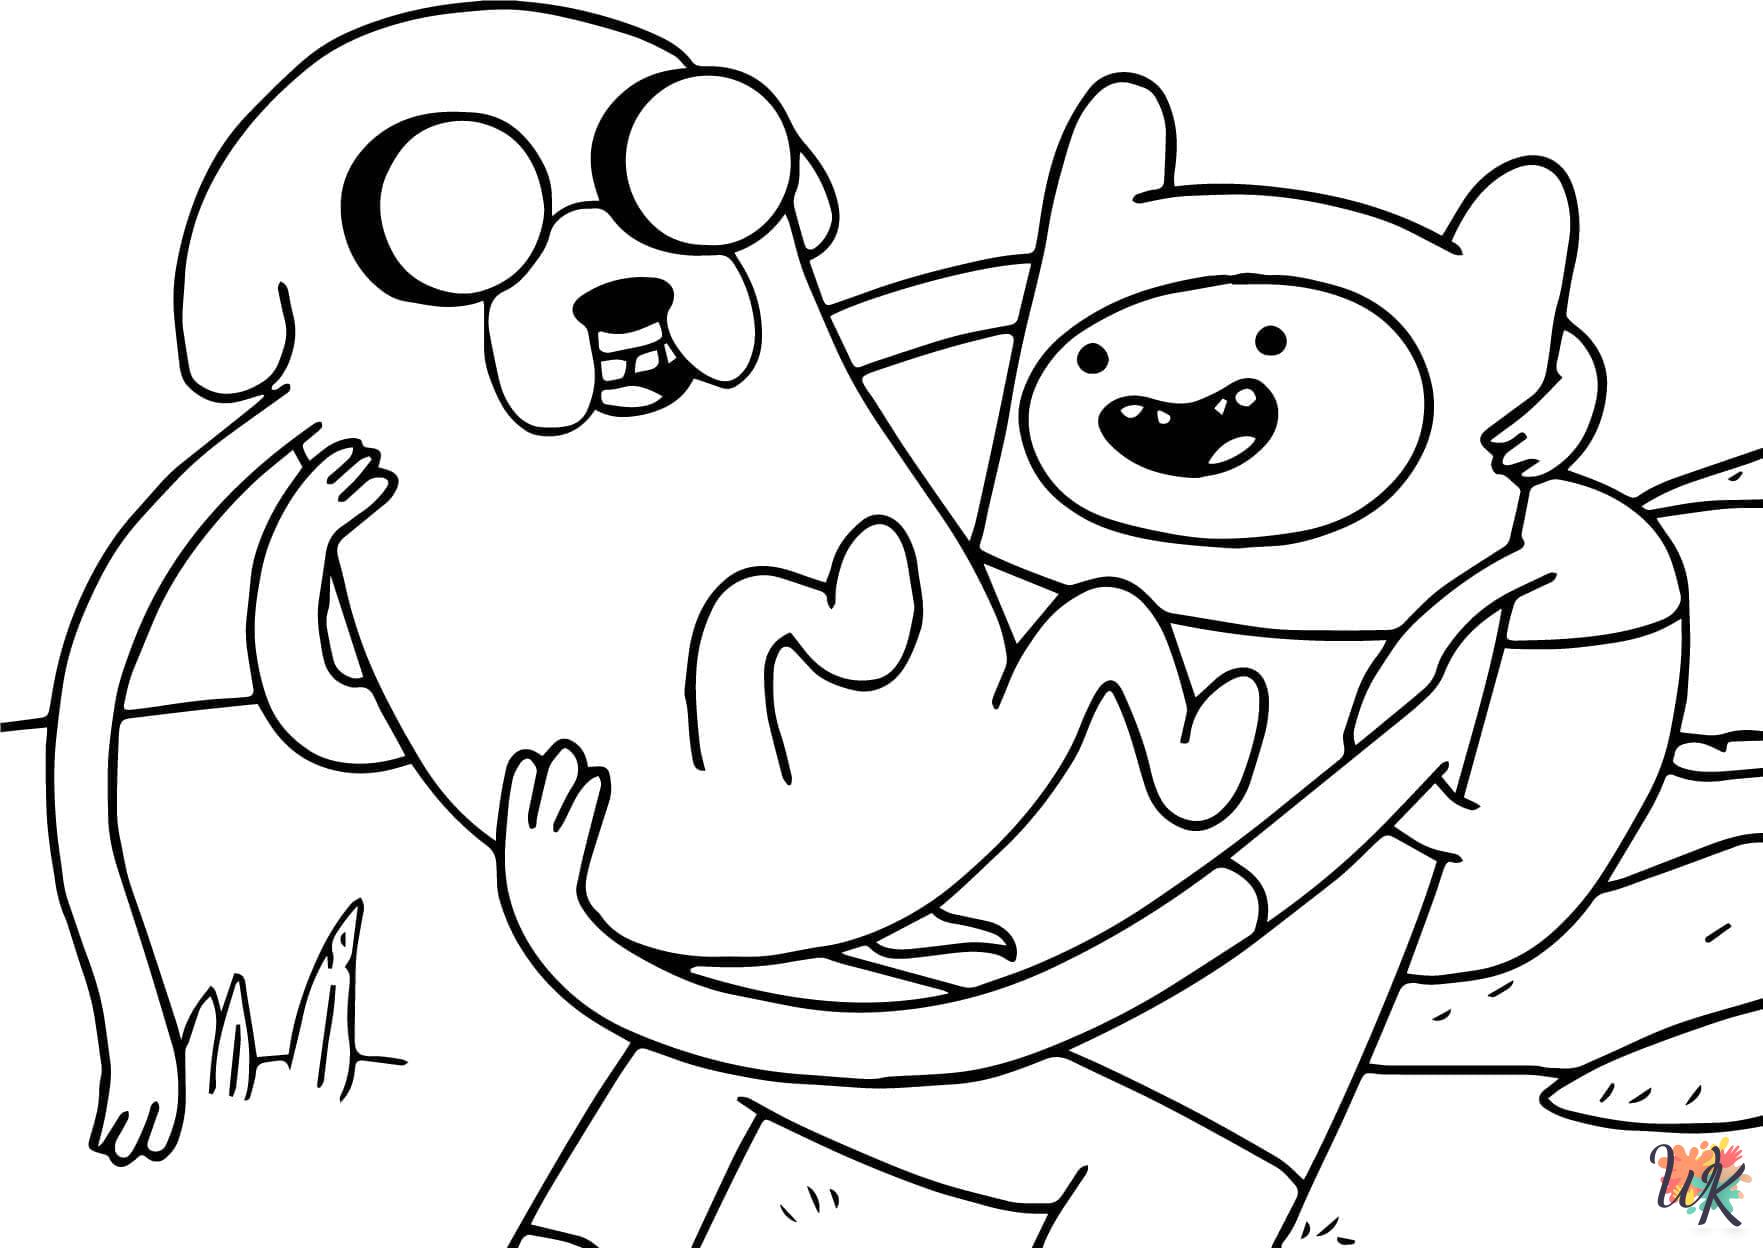 Adventure Time coloring pages to print